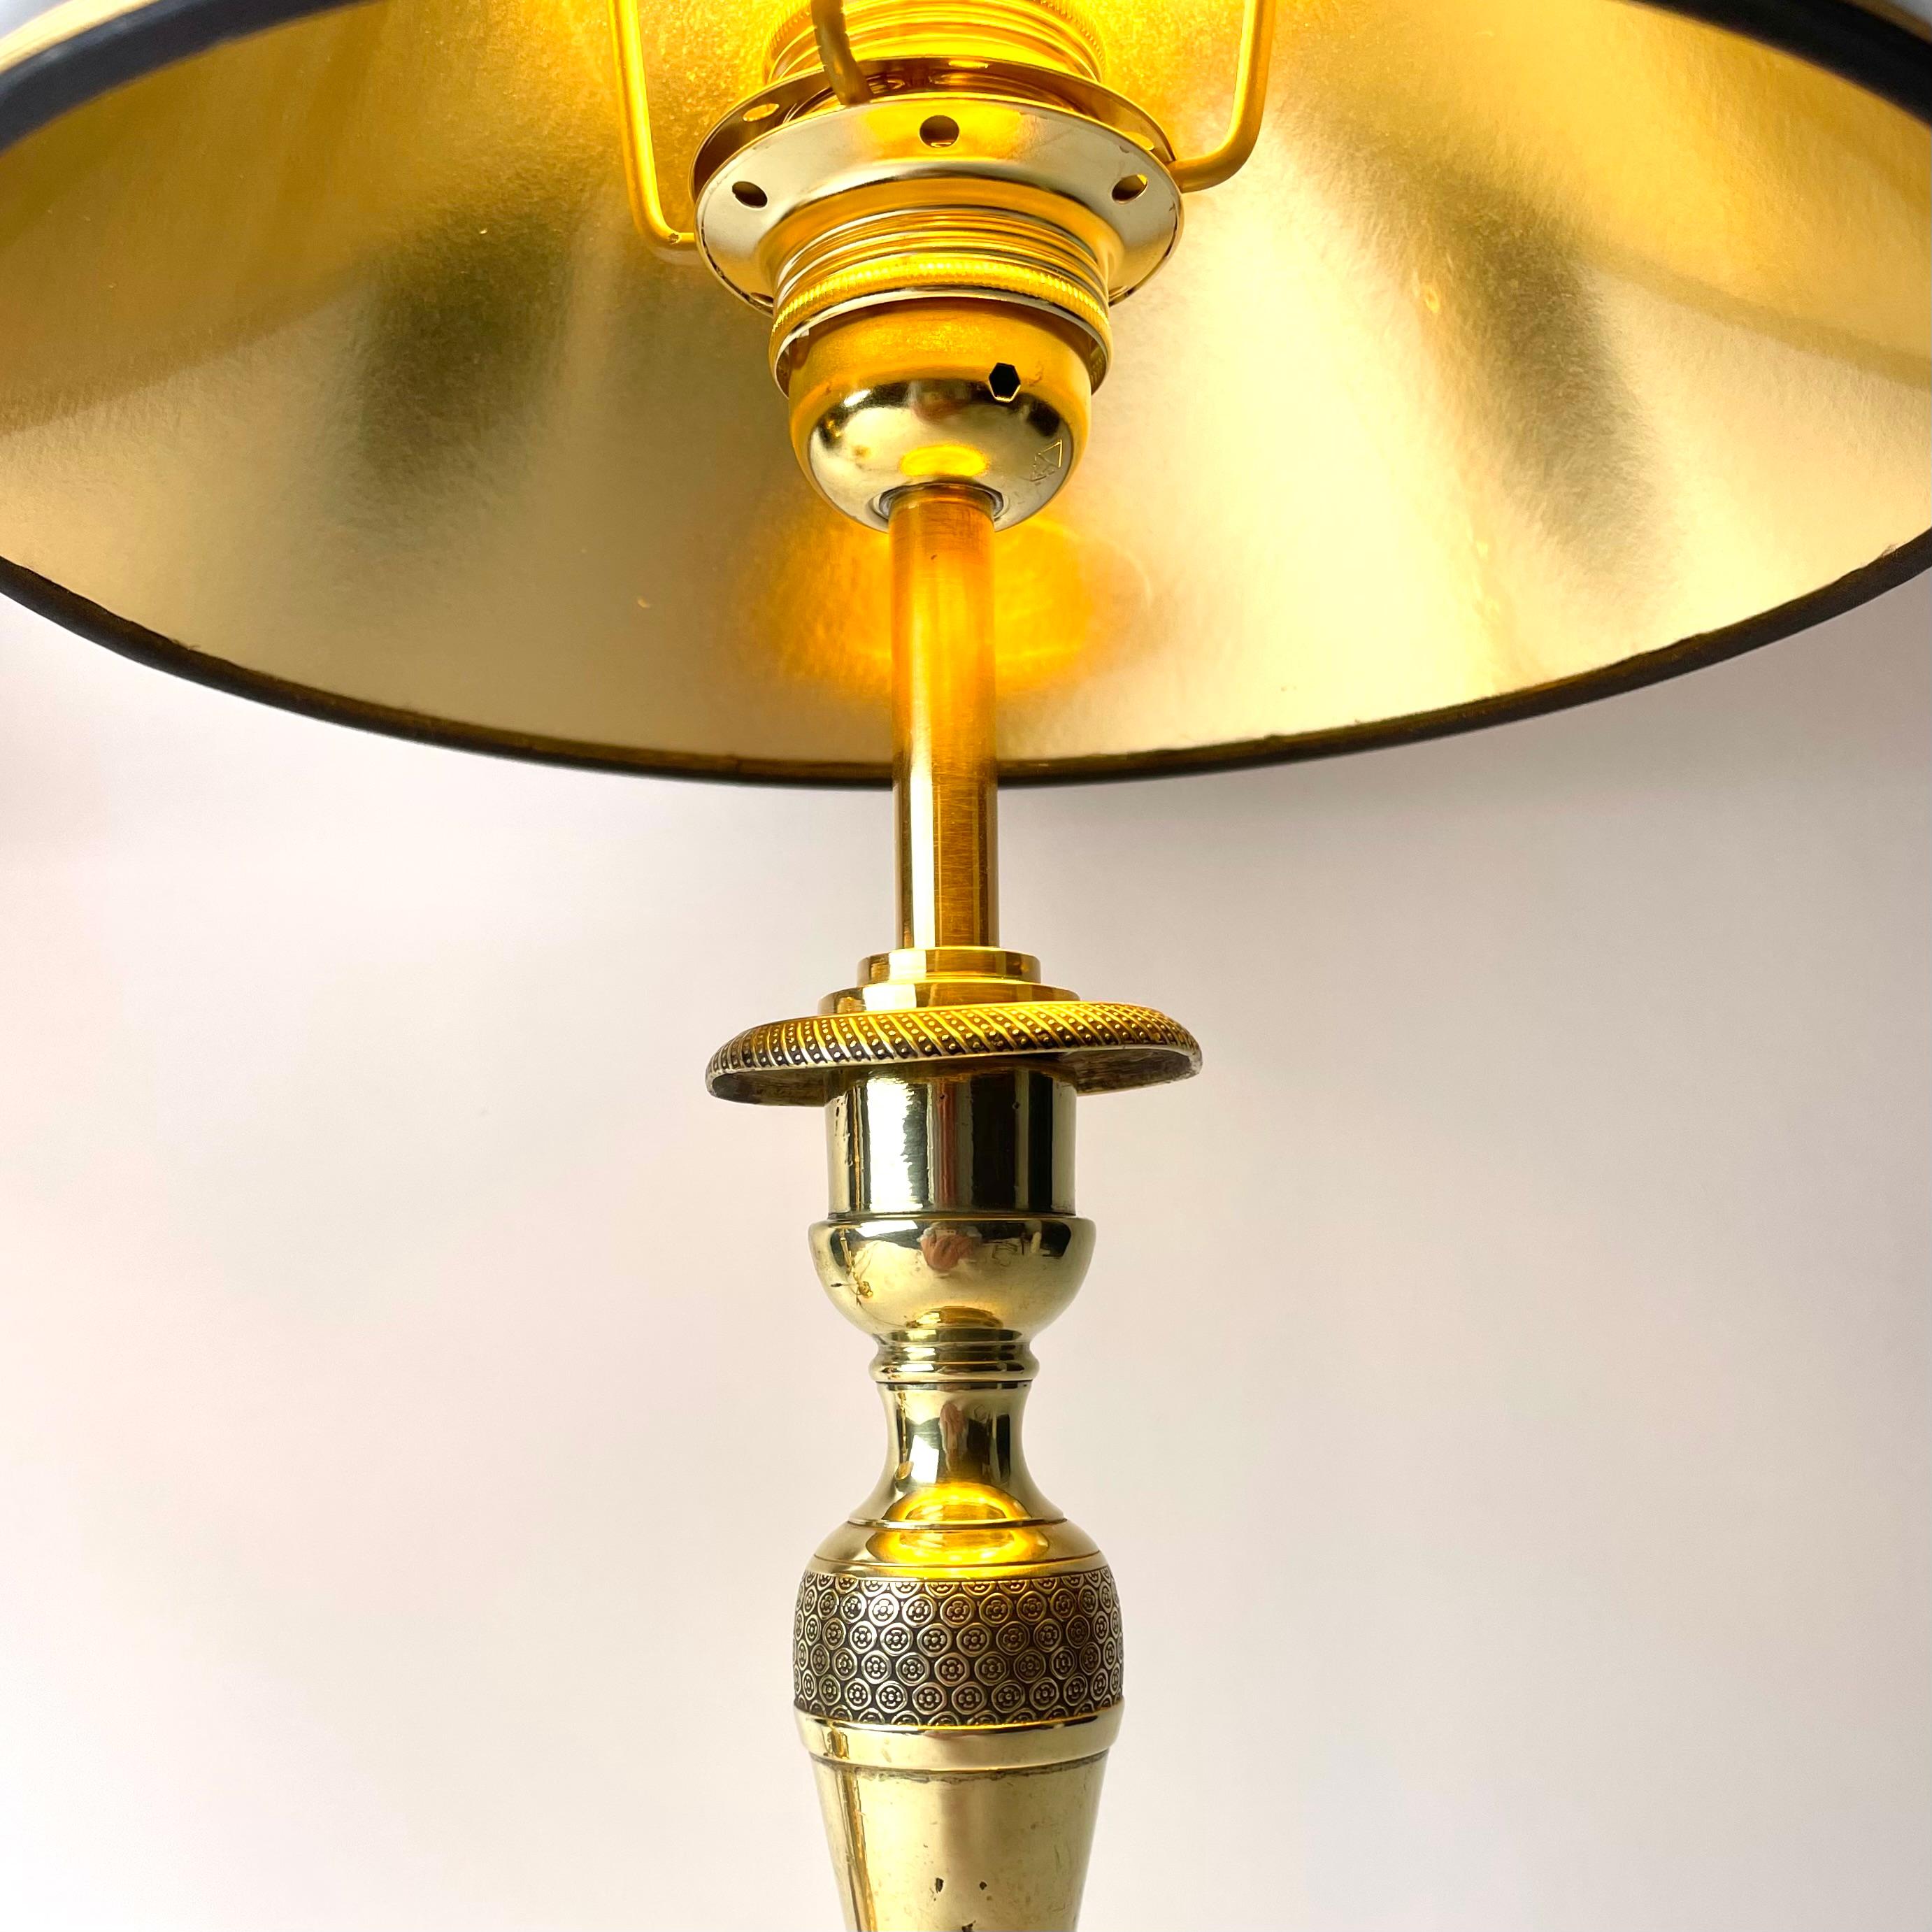 Pair of Elegant Empire Table Lamps in Brass, Early 19th Century 1